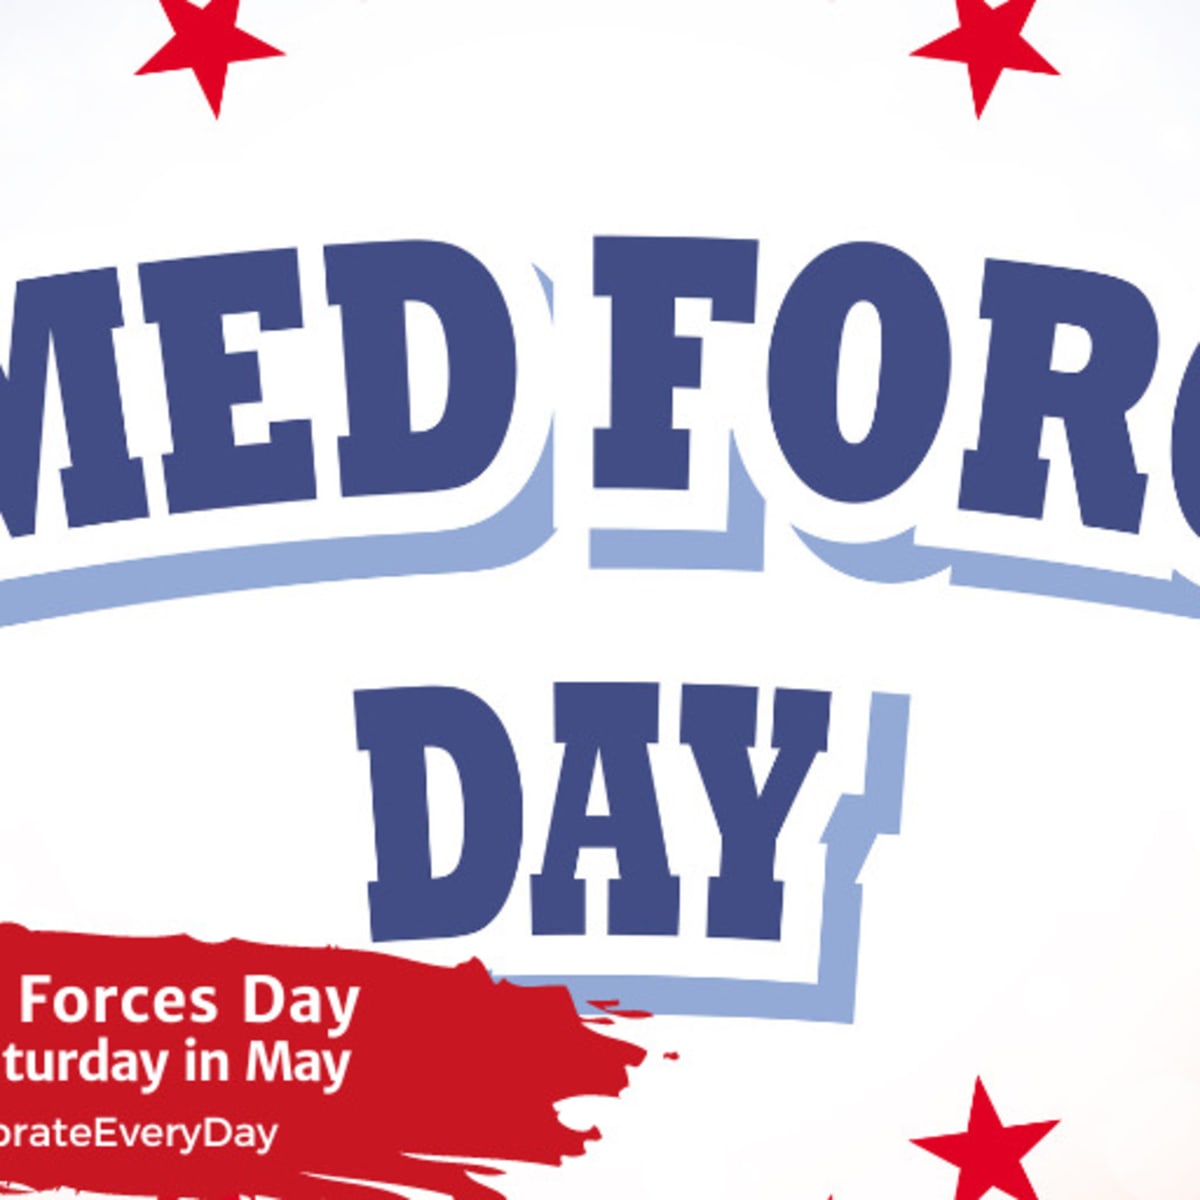 ARMED FORCES DAY - Third Saturday in May - National Day Calendar